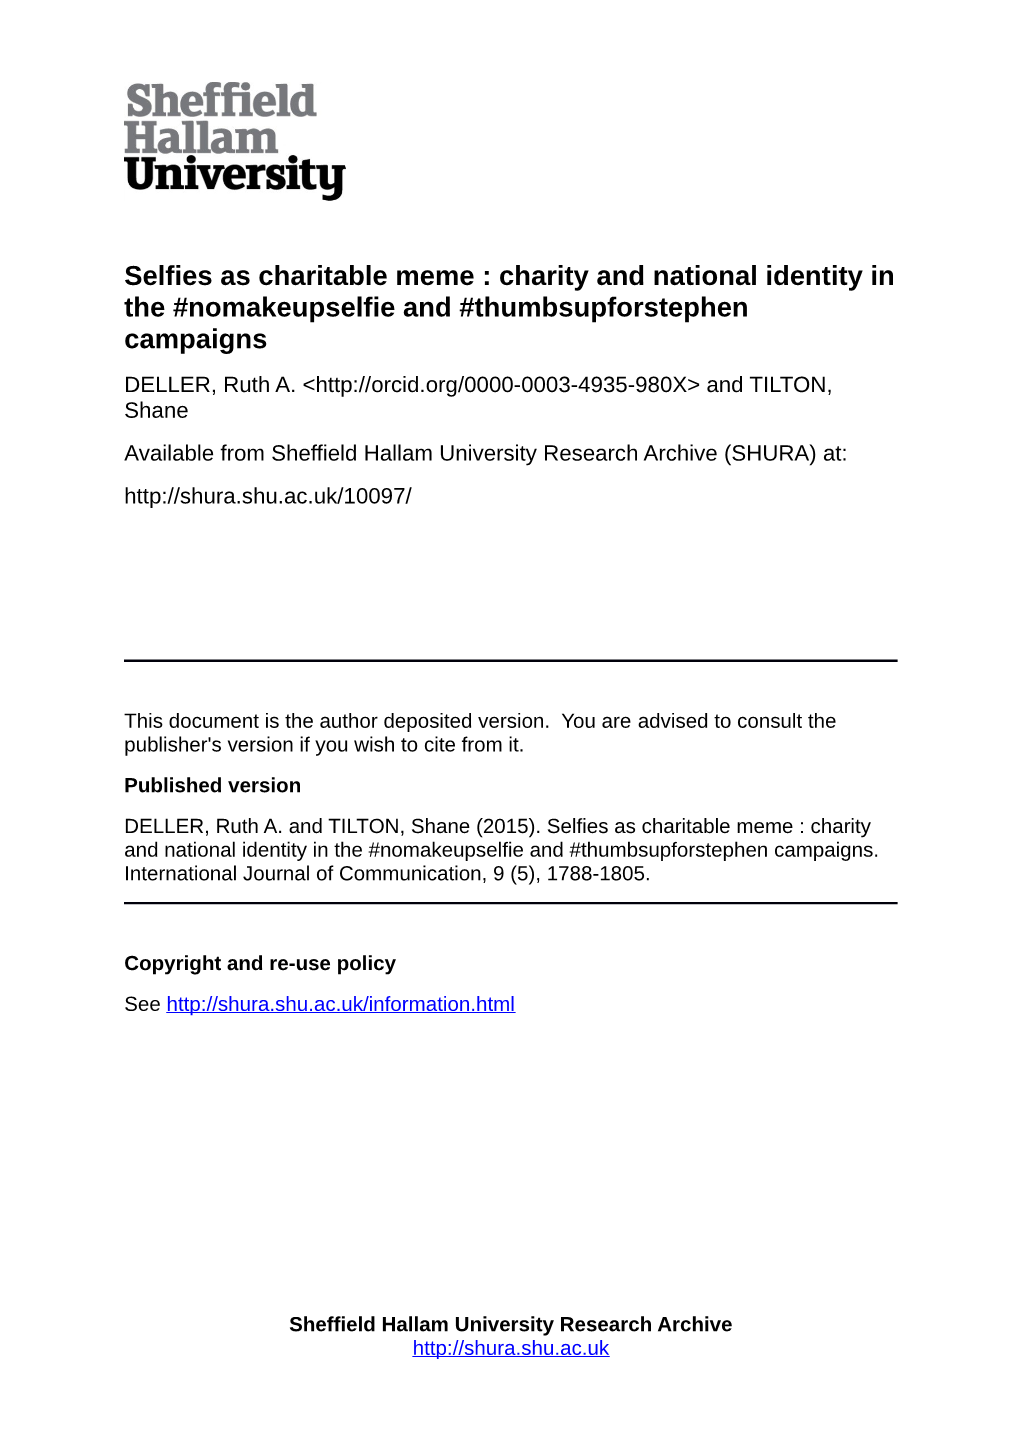 Selfies As Charitable Meme : Charity and National Identity in the #Nomakeupselfie and #Thumbsupforstephen Campaigns DELLER, Ruth A